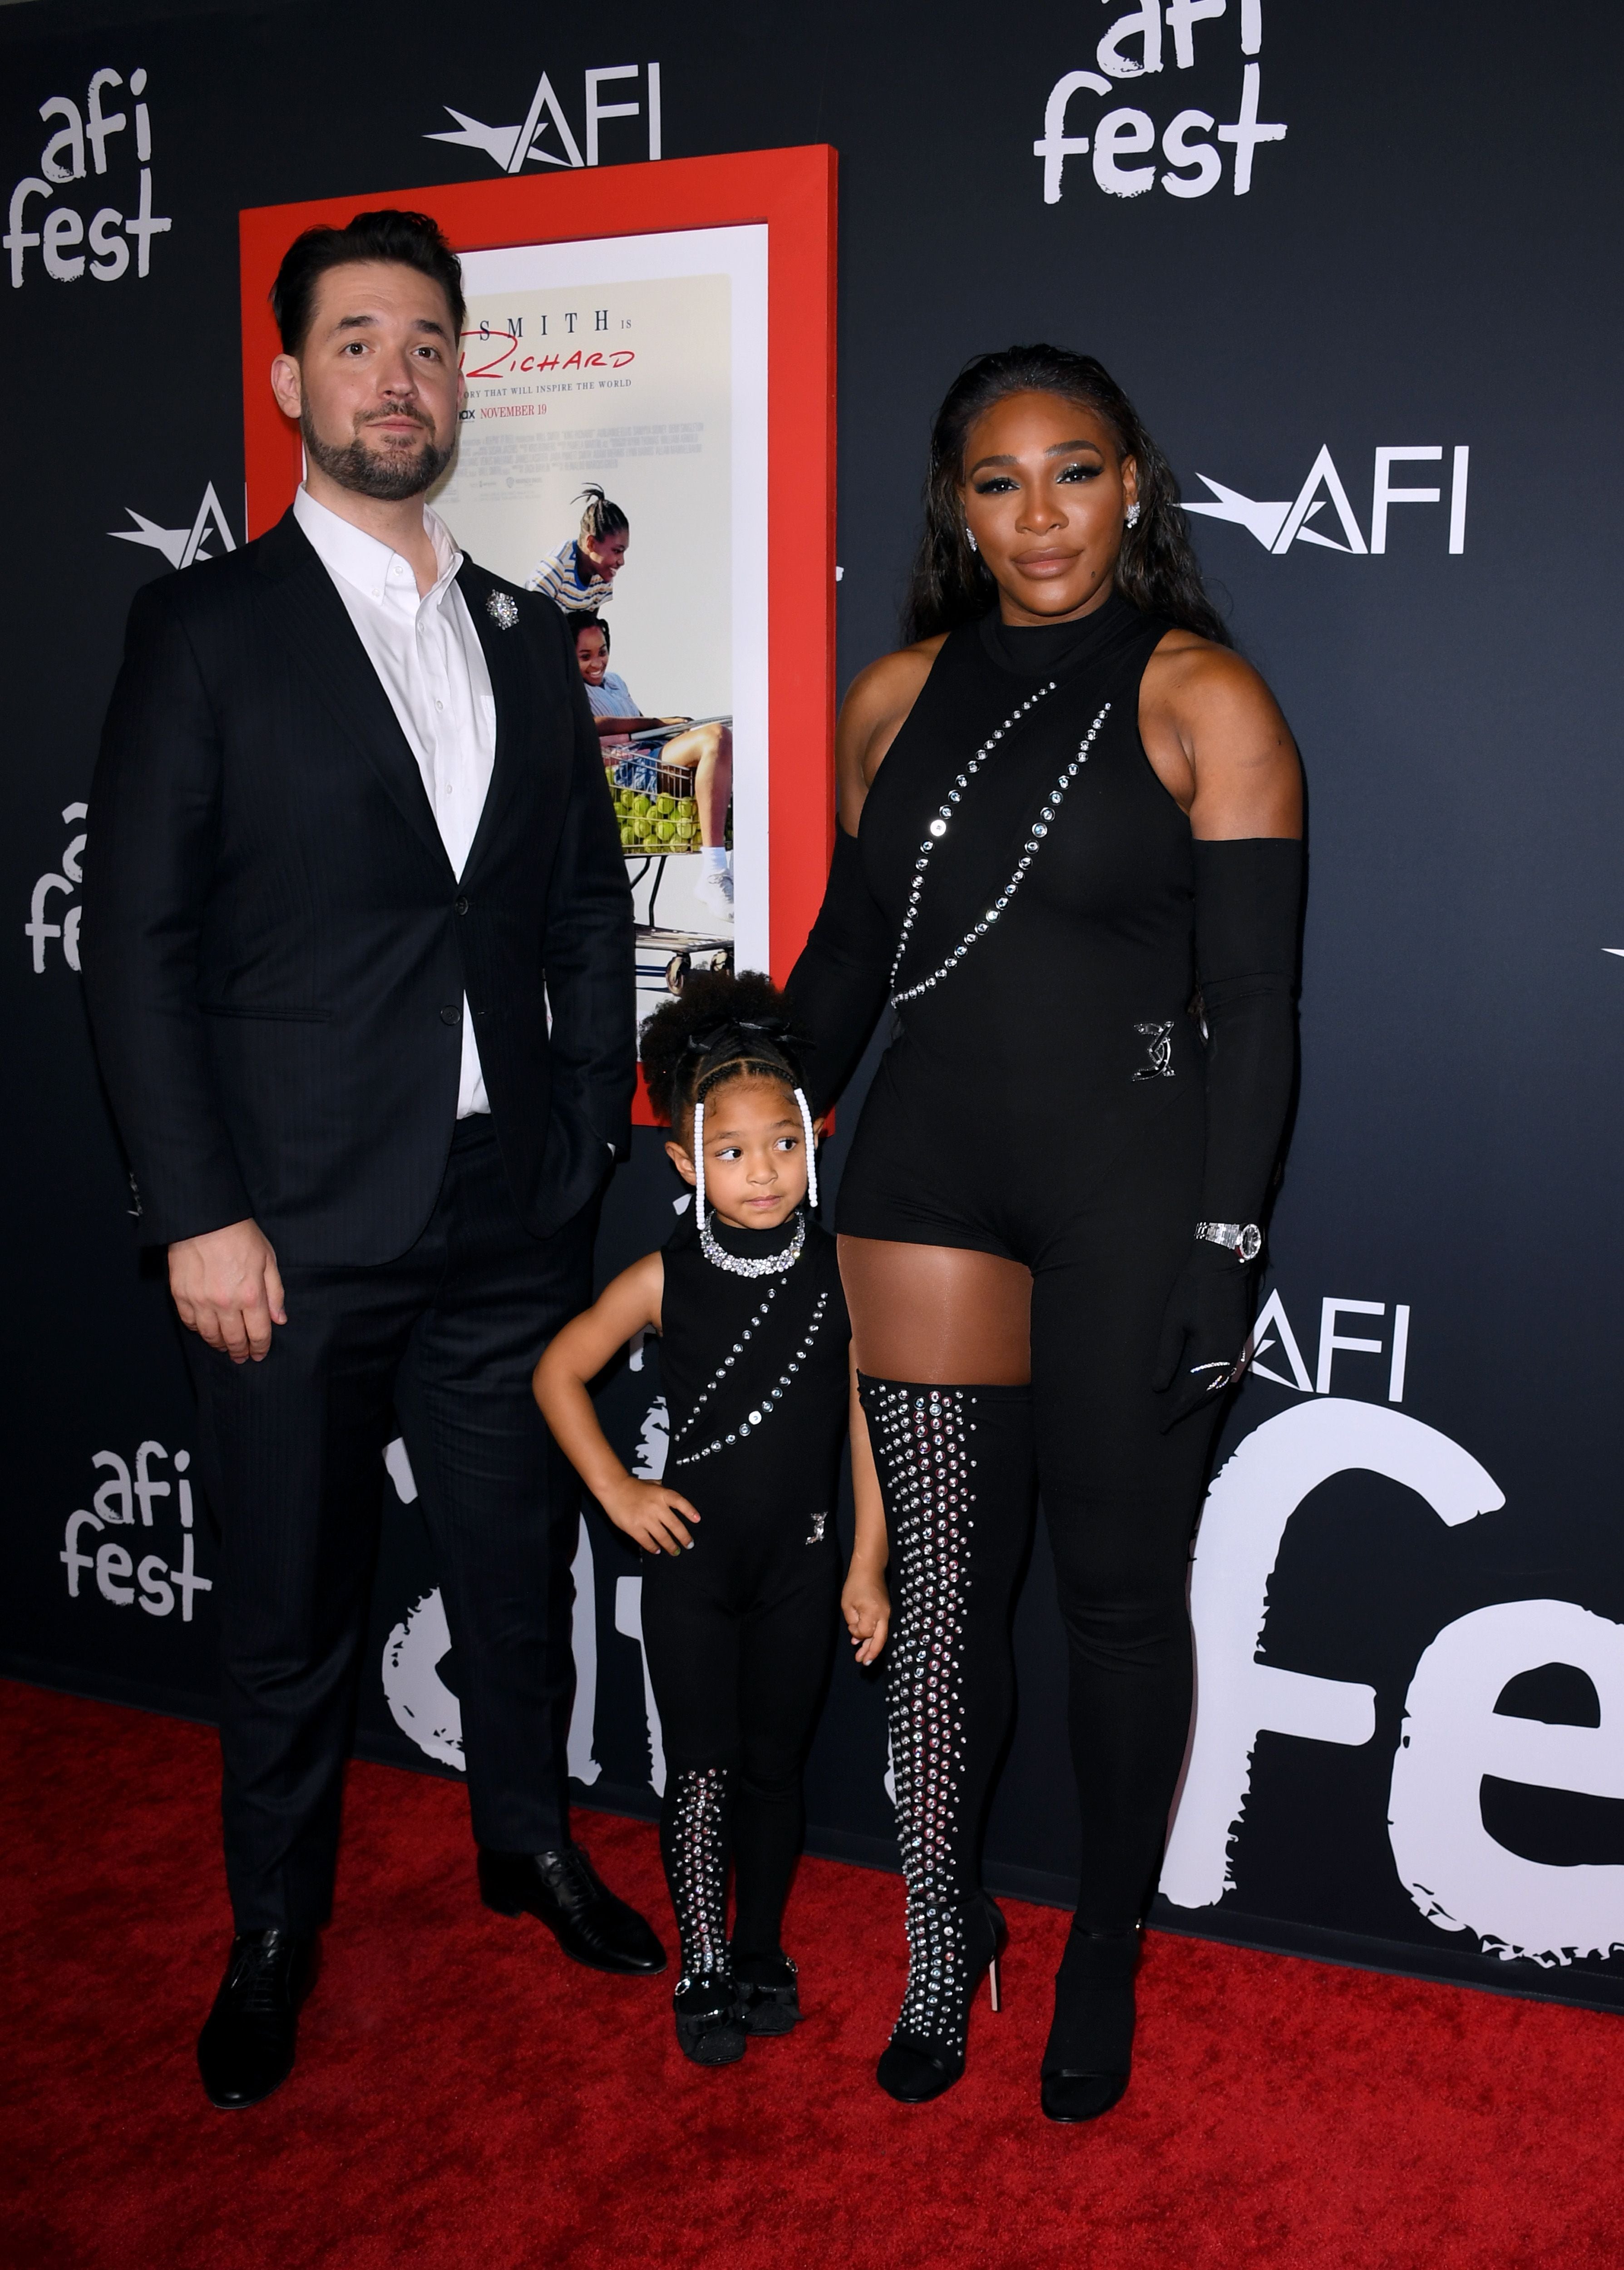 Serena Williams and her daughter match on red carpet